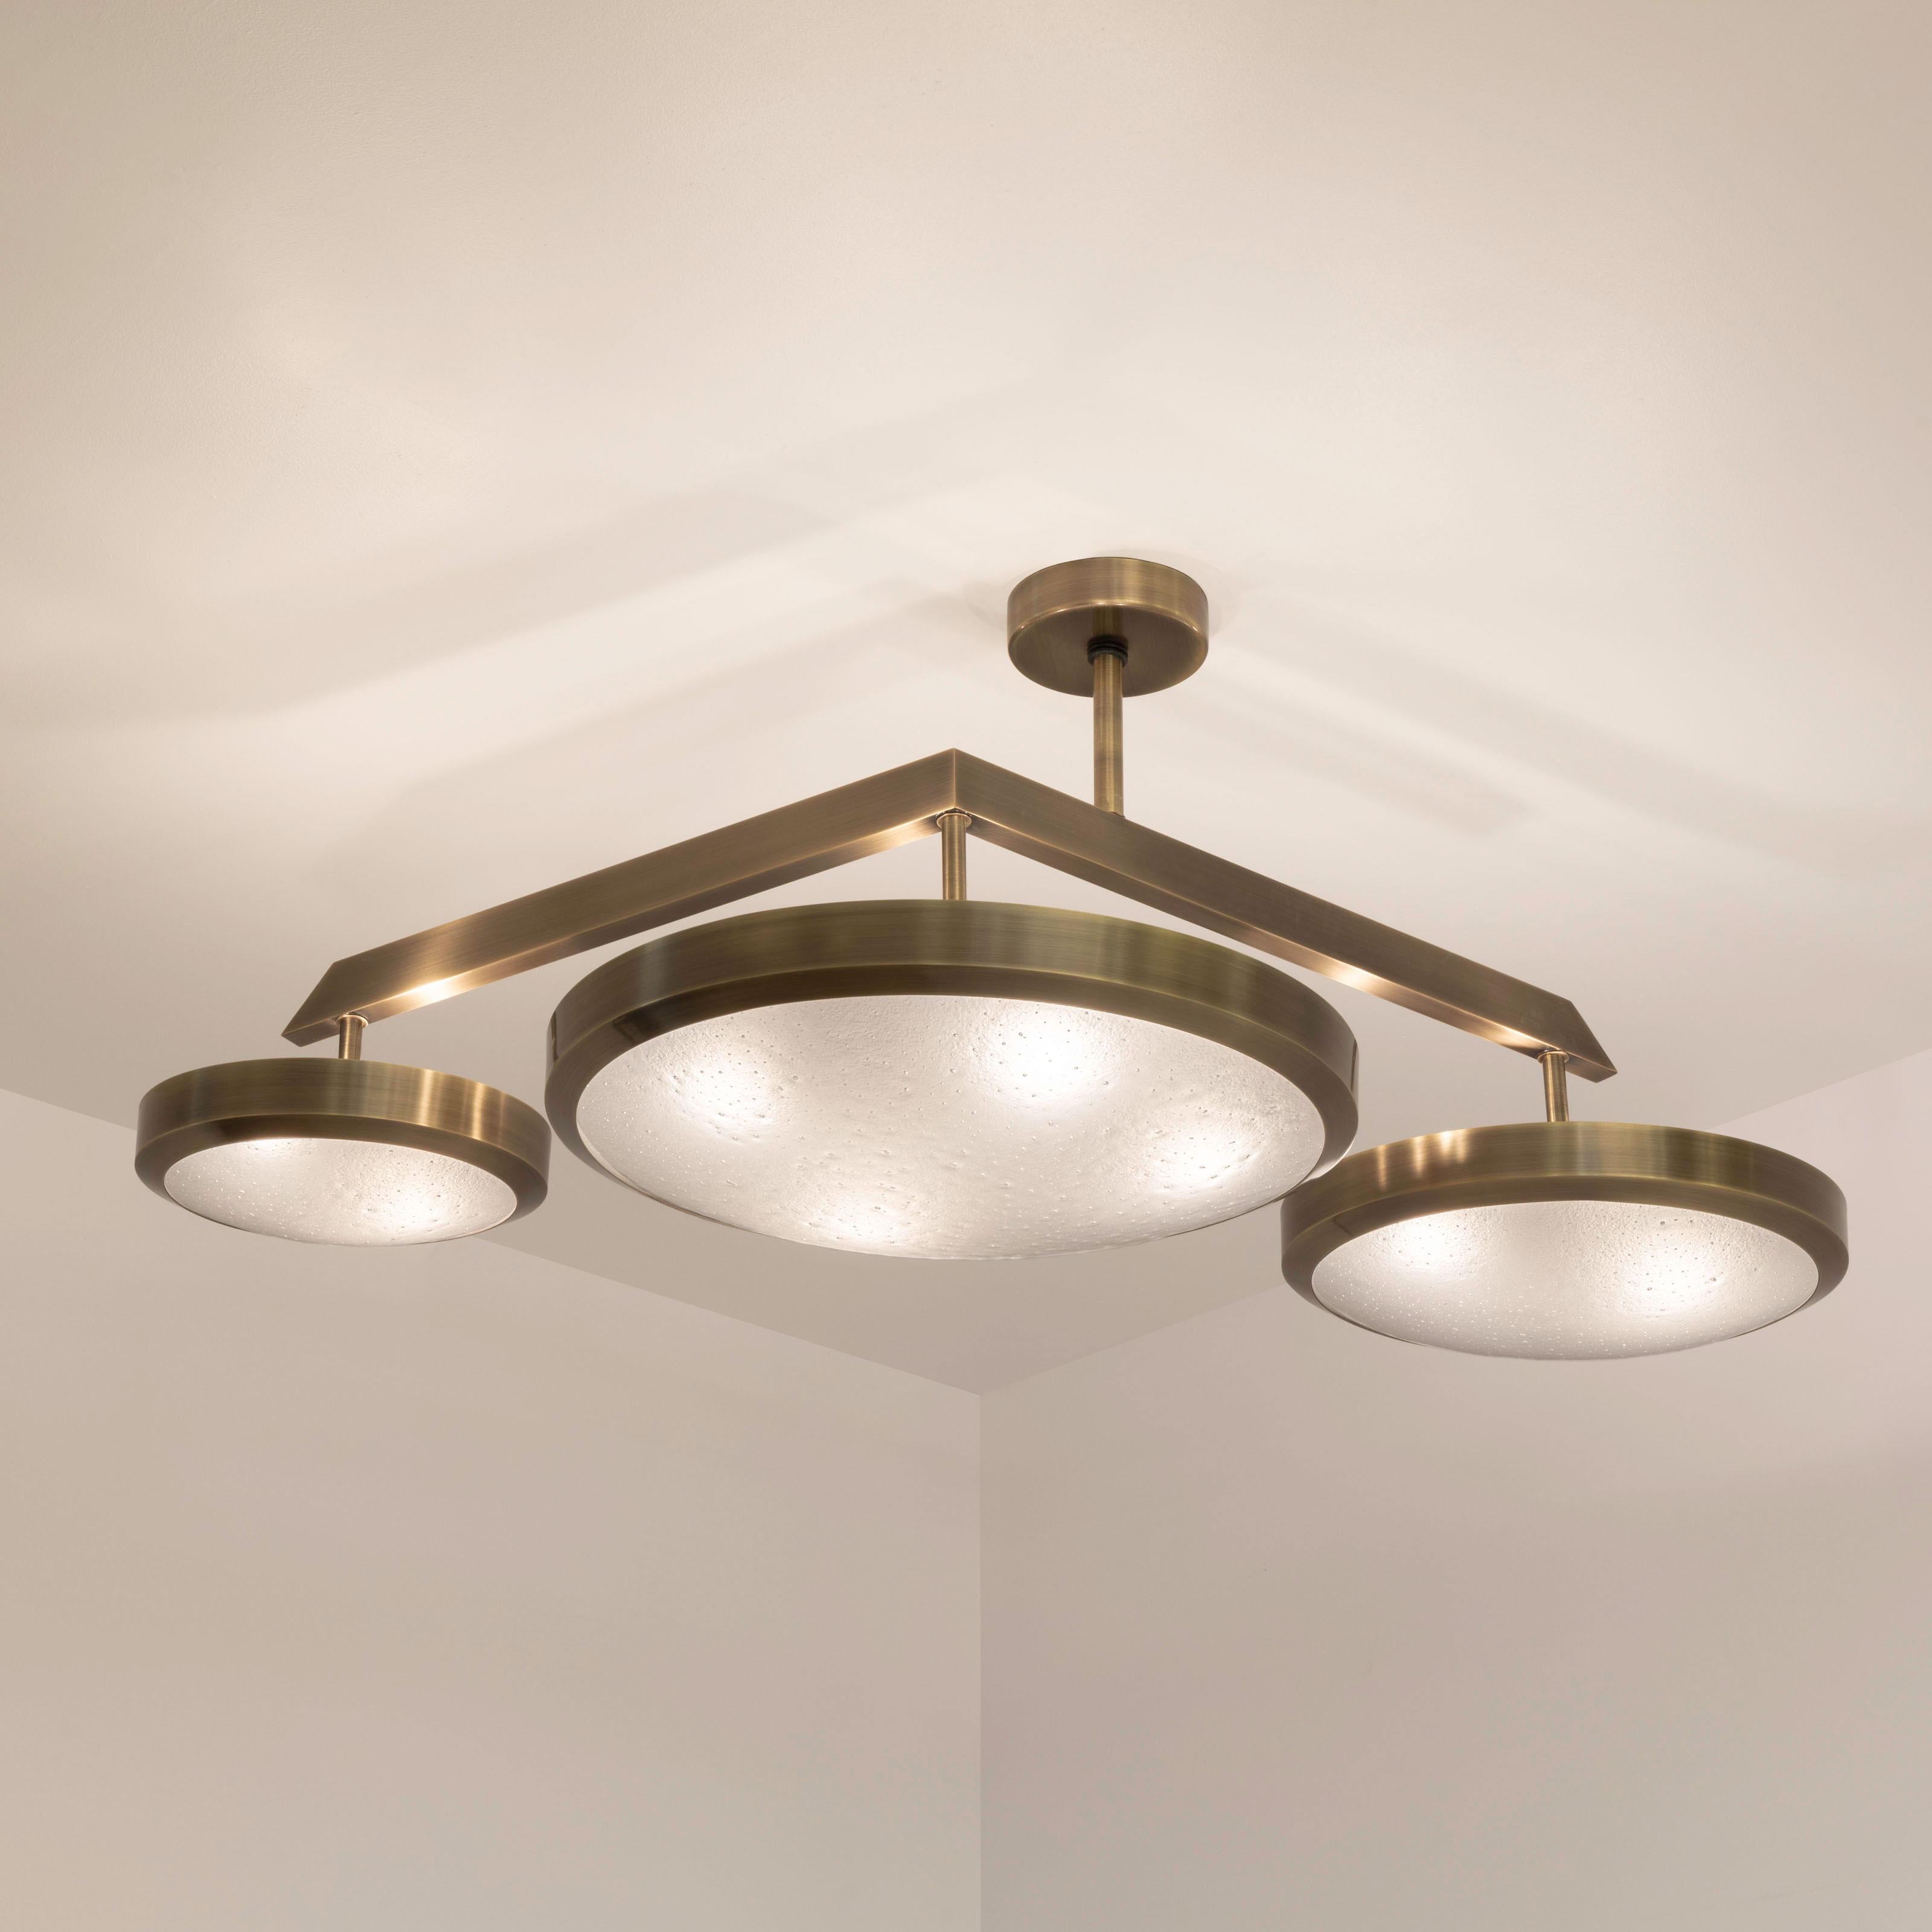 Zeta Ceiling Light by Gaspare Asaro - Polished Brass Finish For Sale 3